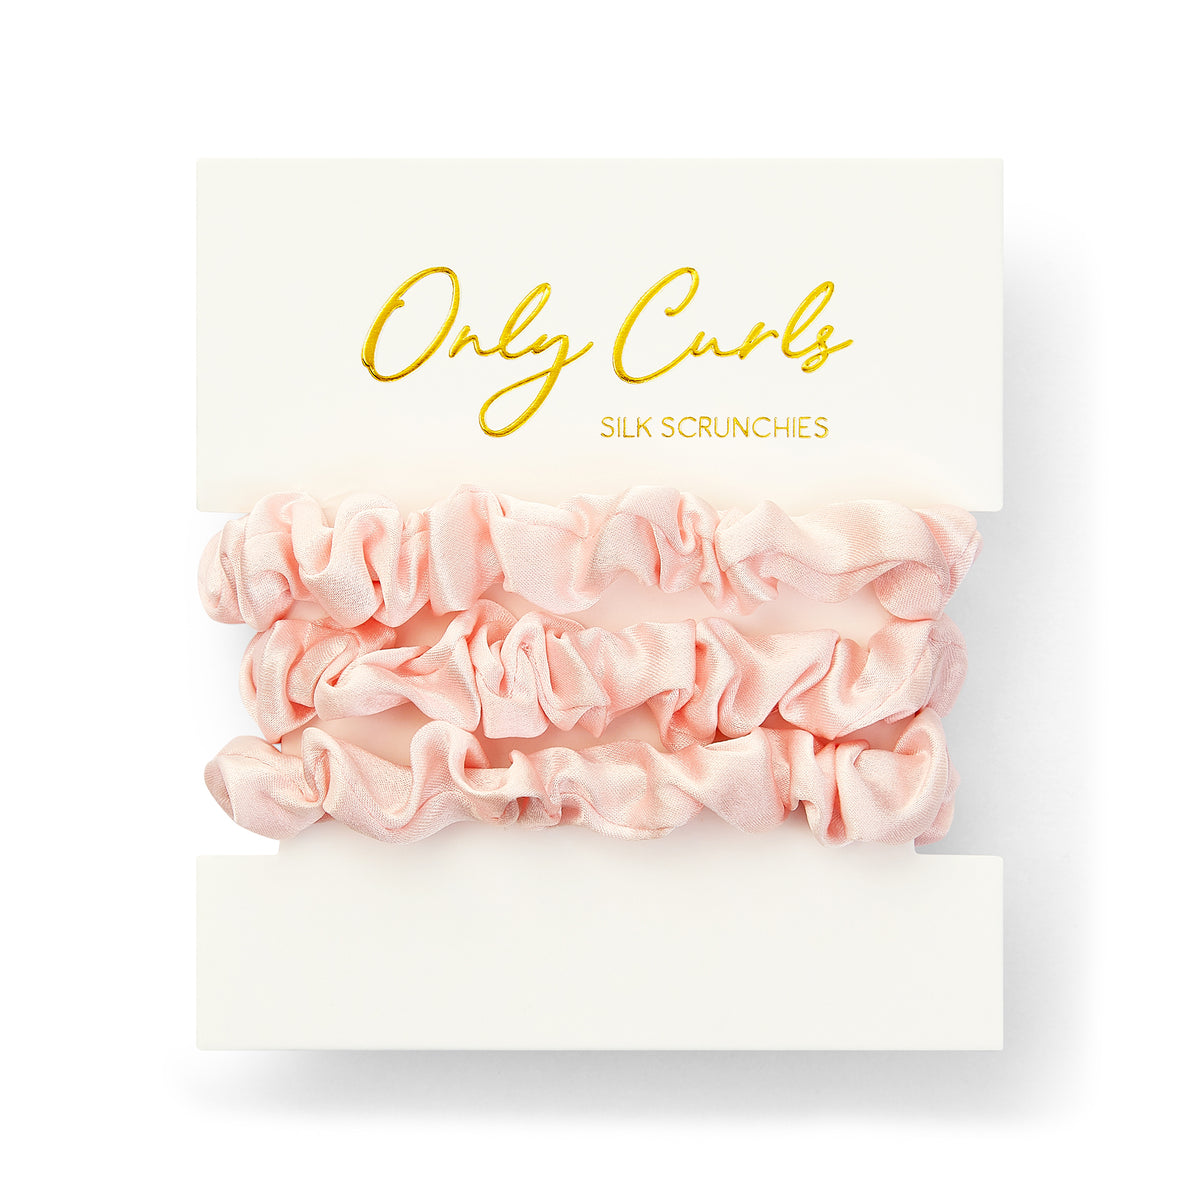 Only Curls Silk Scrunchies Pink - Mini - Only Curls